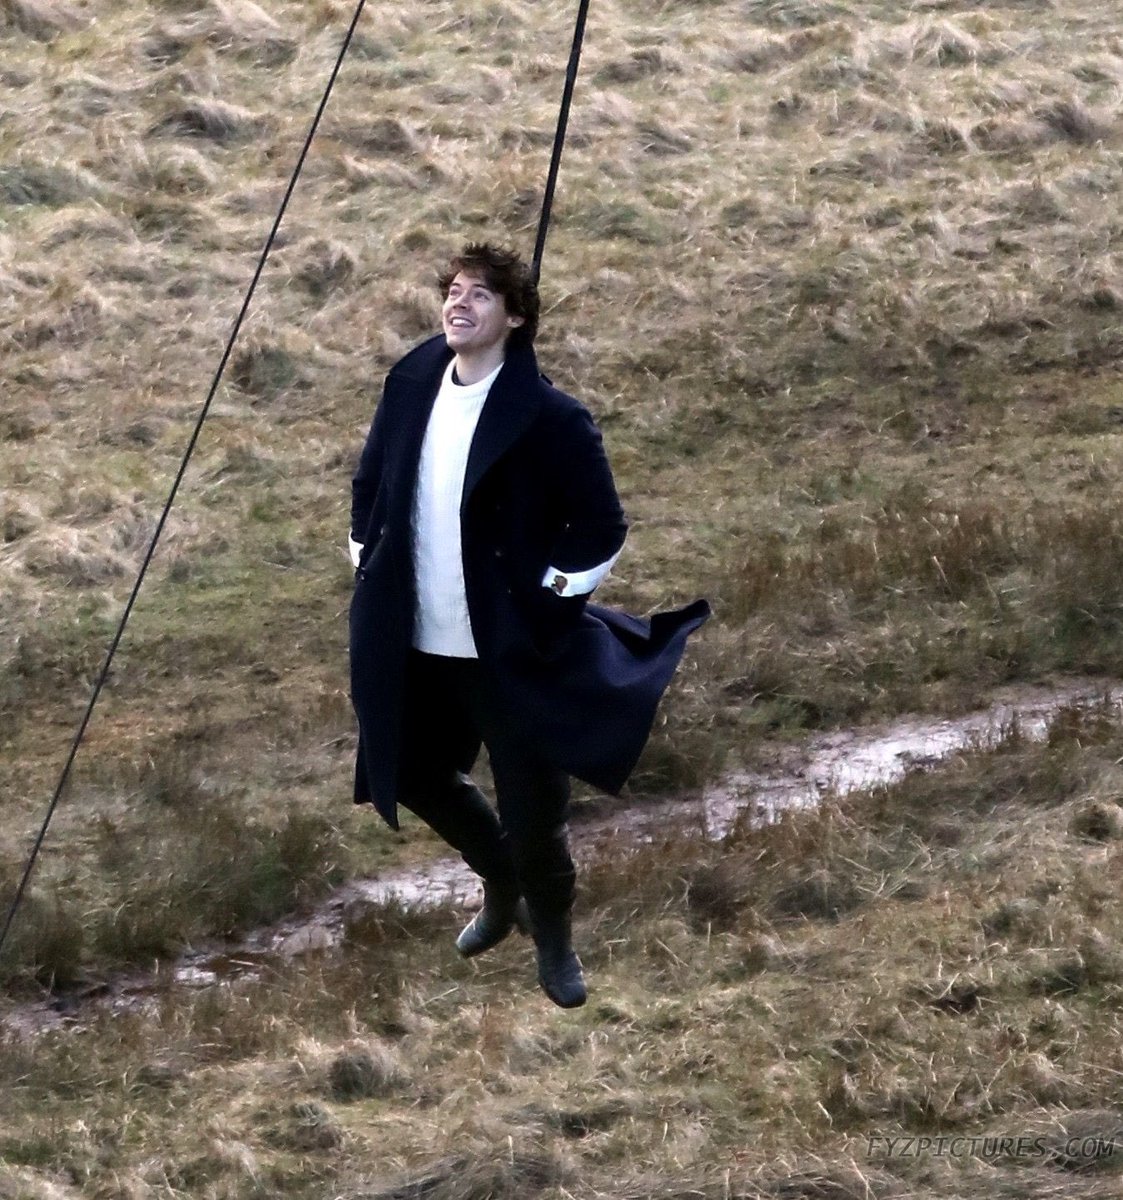 hanging 500 feet up in the air by a helicopter for the music video of his debut single, sign of the times